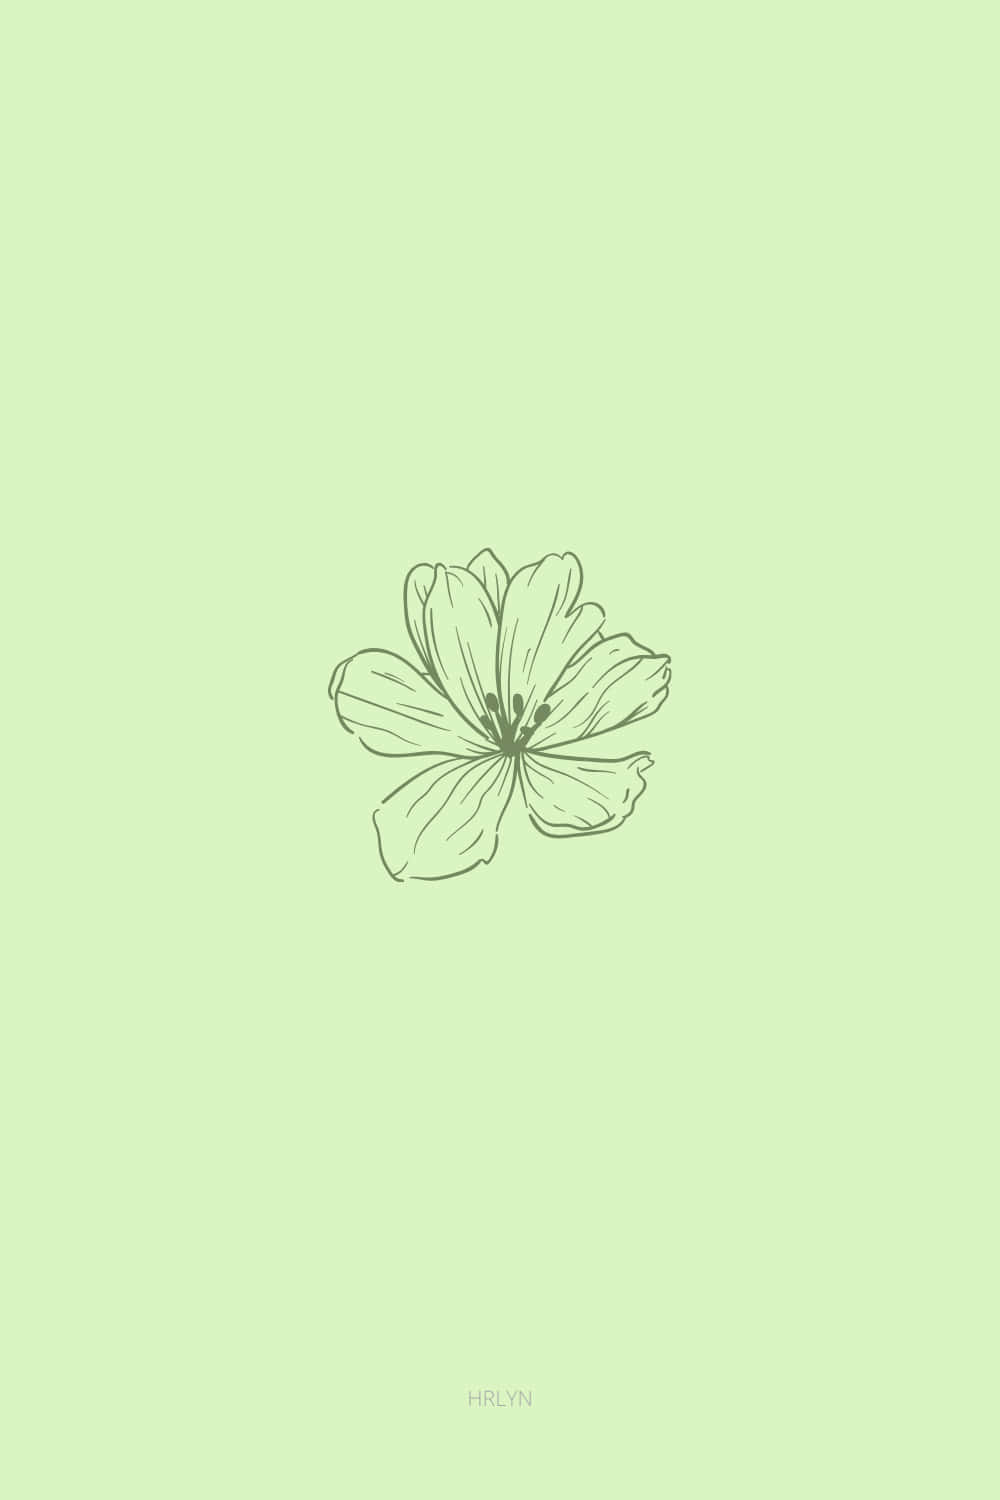 Cute Sage Green Flower Drawn On The Center Background